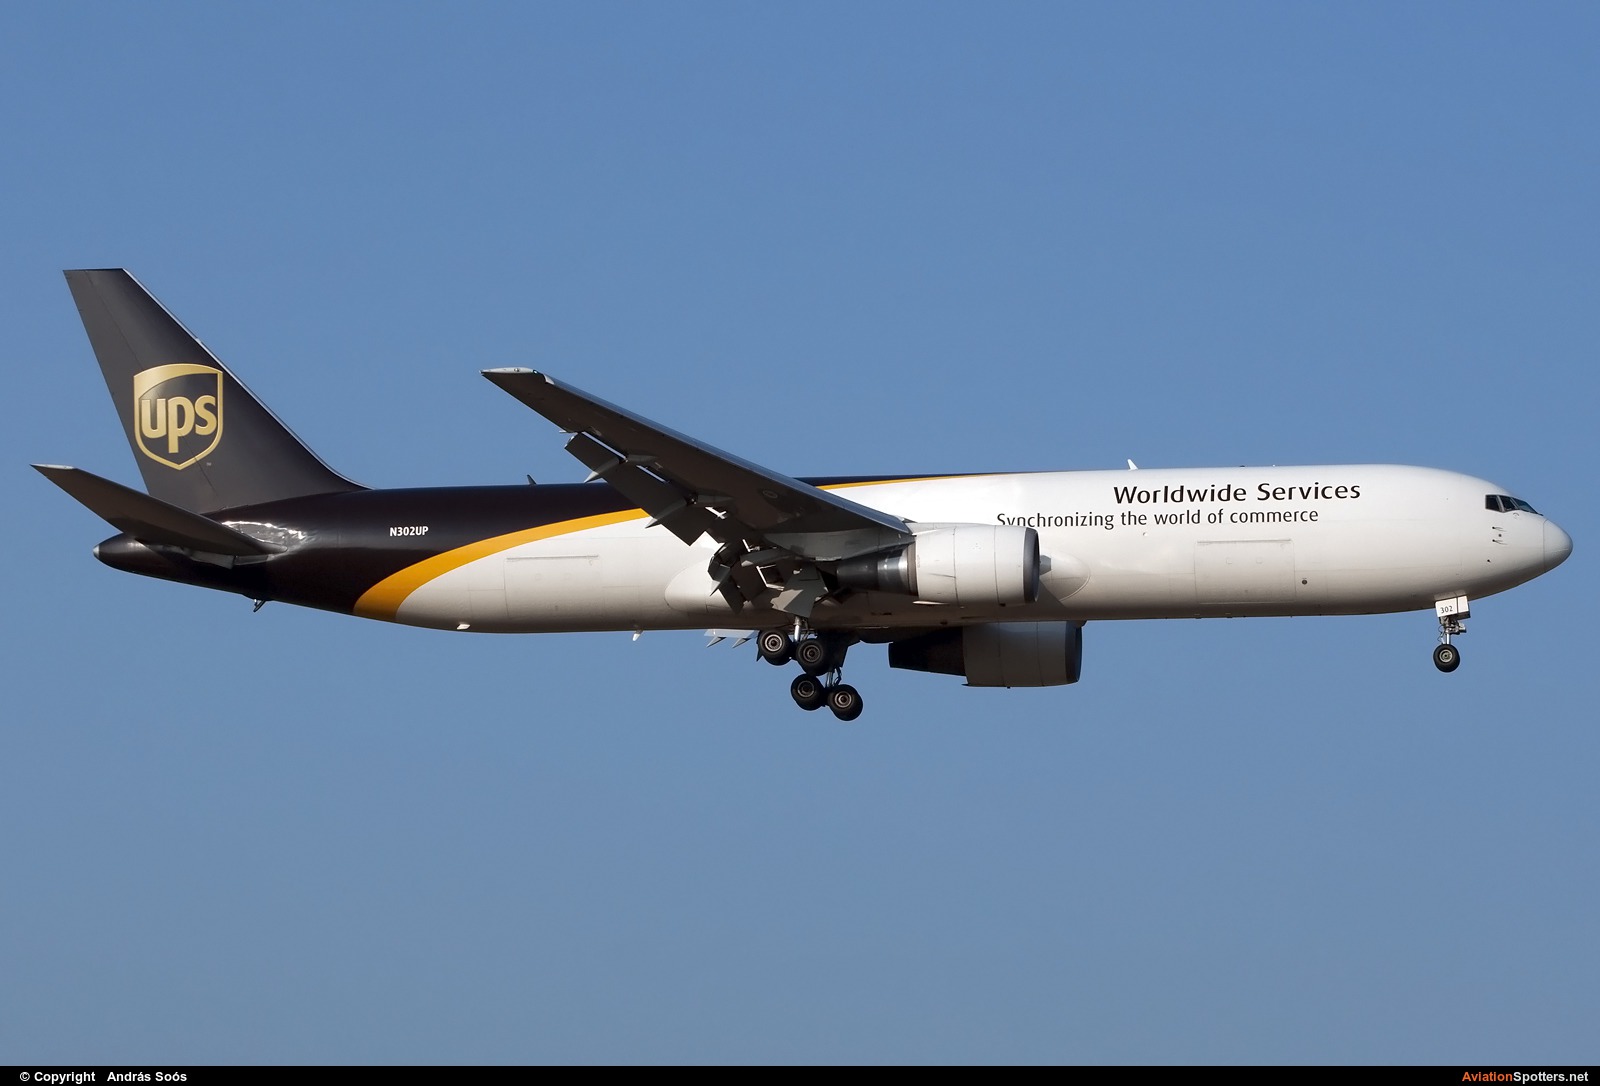 UPS - United Parcel Service  -  767-300F  (N302UP) By András Soós (sas1965)